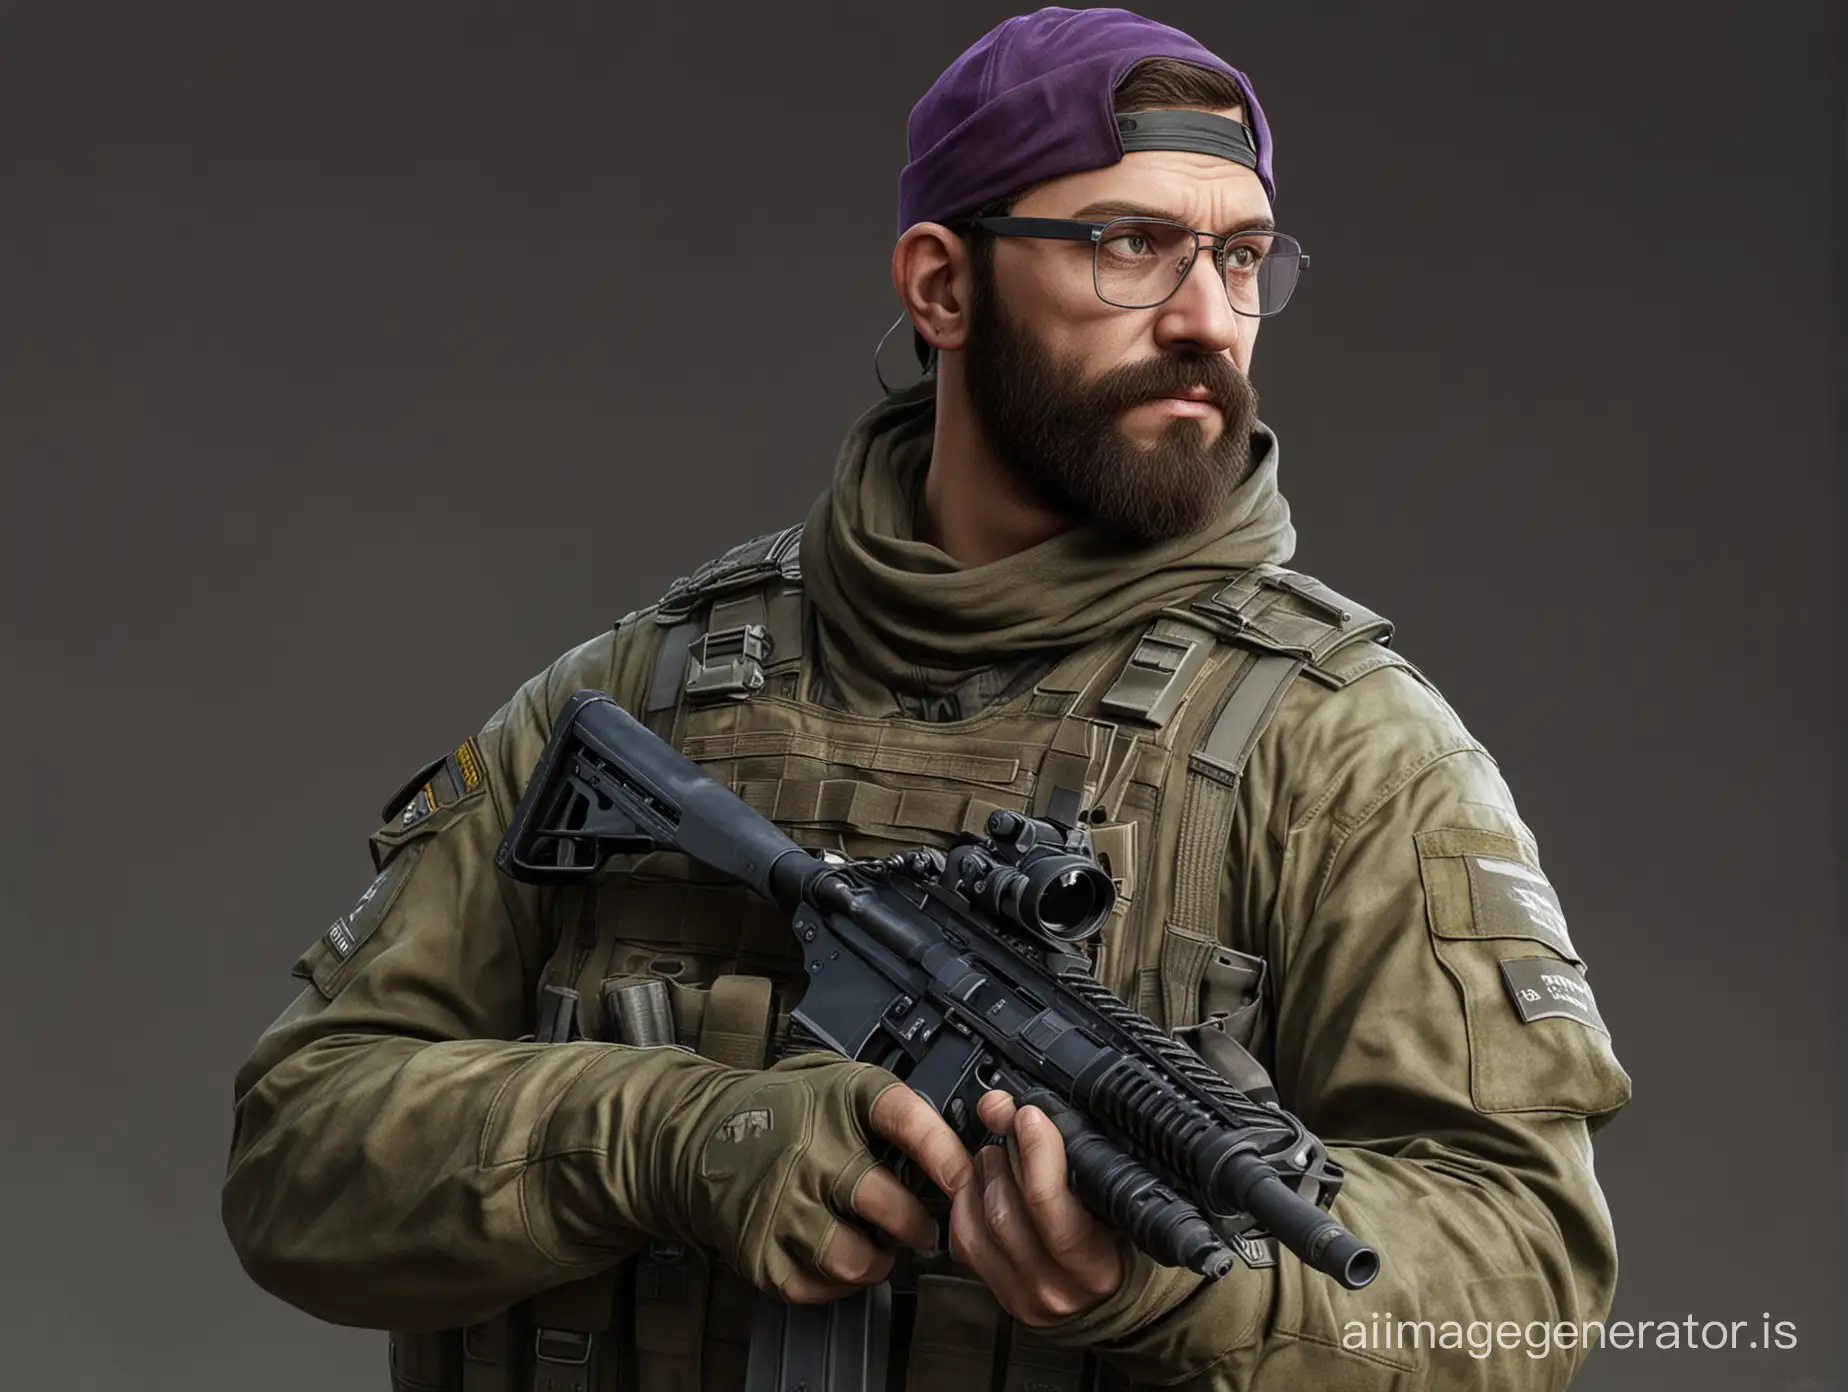 I'd like a realistic image of Frank Fragger dressed up as a soldier from escape from tarkov. Frank Fragger is a streamer on Twitch and he likes purple, and 80s stuff.  
Frank has a beard and he's bold, he has brown eyes and olive skin.  
Frank is using a silenced m4 automatic rifle.  
Can you also add a war background to the image and Frank Fragger logo on the jacket. 